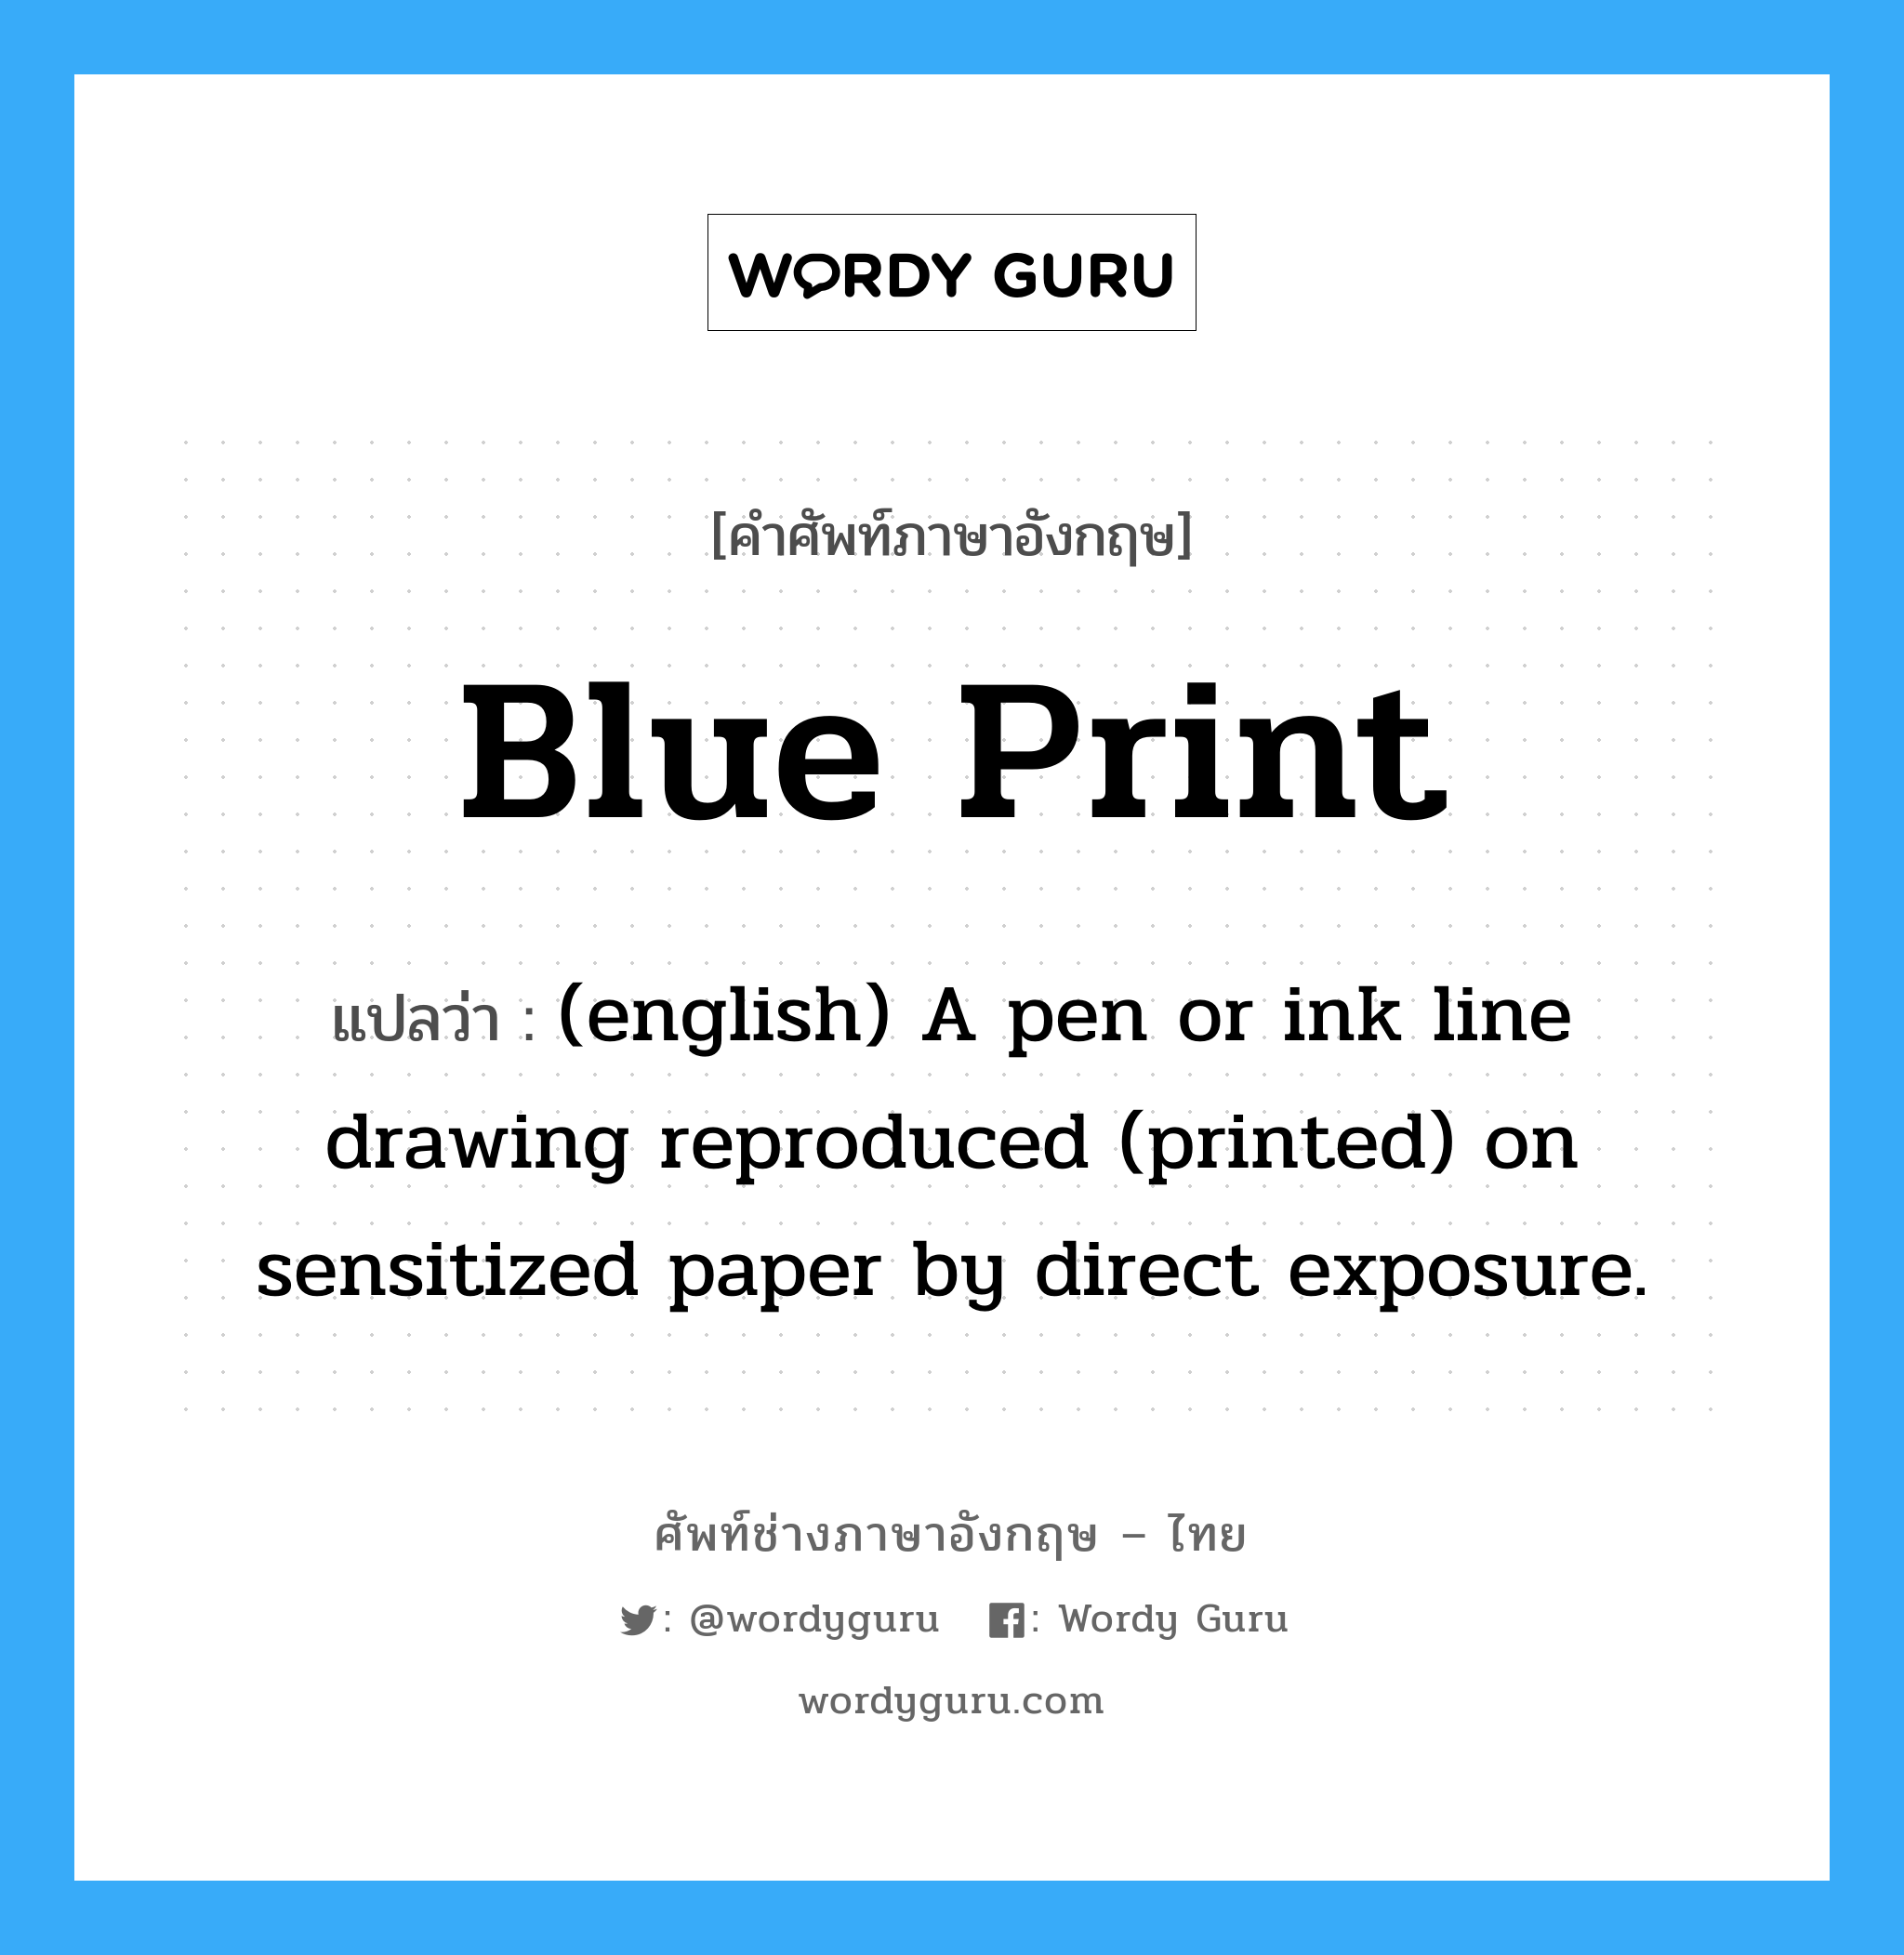 Blue Print แปลว่า?, คำศัพท์ช่างภาษาอังกฤษ - ไทย Blue Print คำศัพท์ภาษาอังกฤษ Blue Print แปลว่า (english) A pen or ink line drawing reproduced (printed) on sensitized paper by direct exposure.